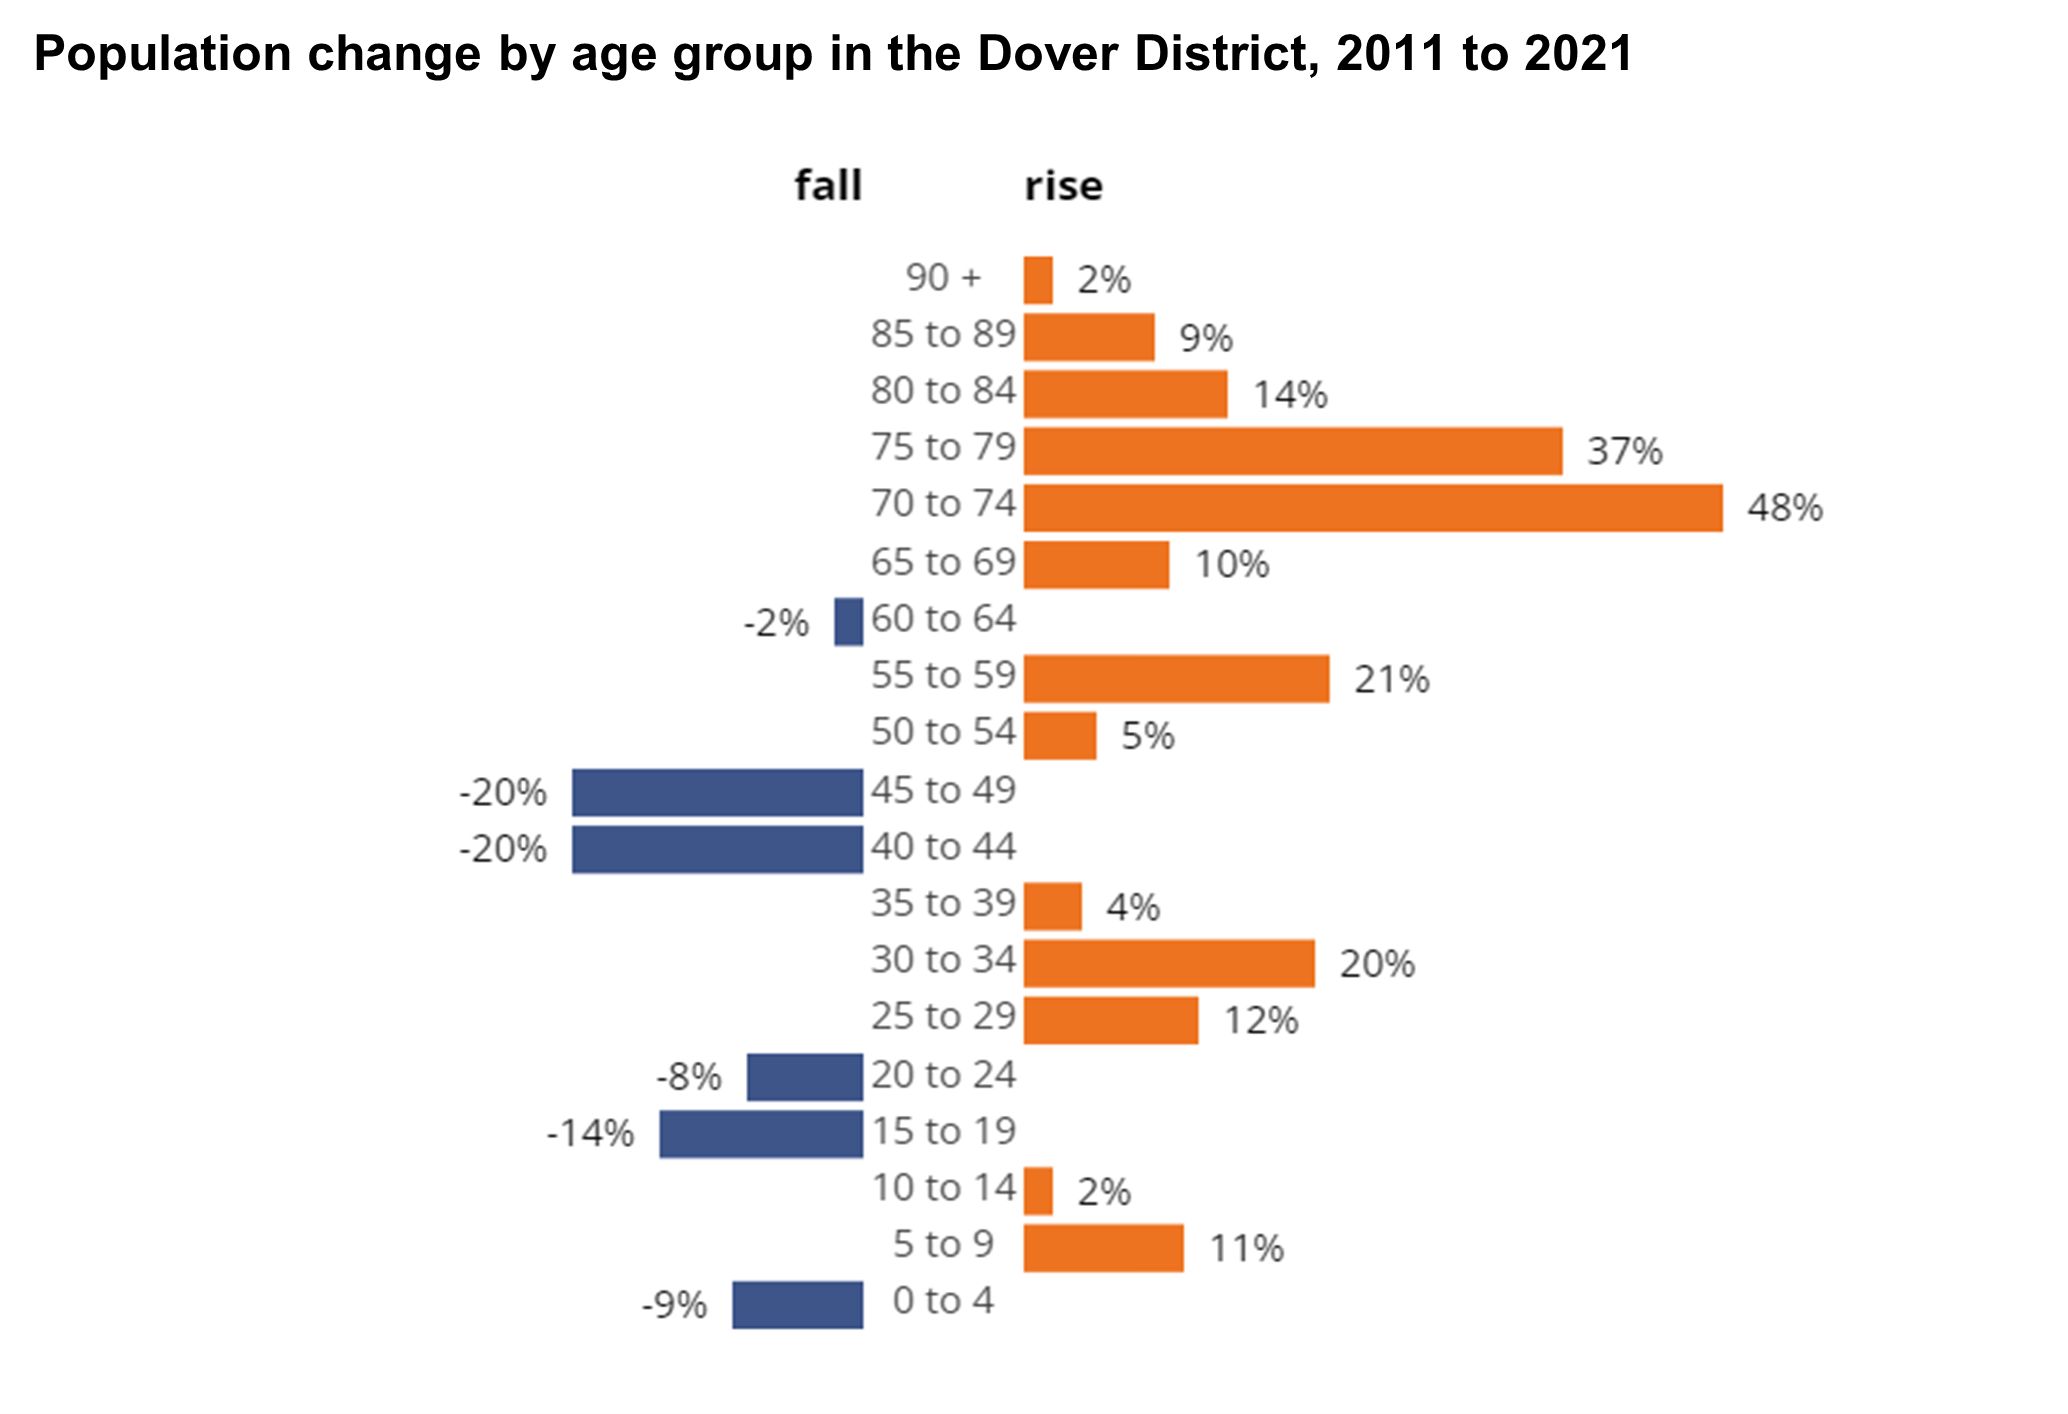 Population change by age group in Dover District 2011 to 2021